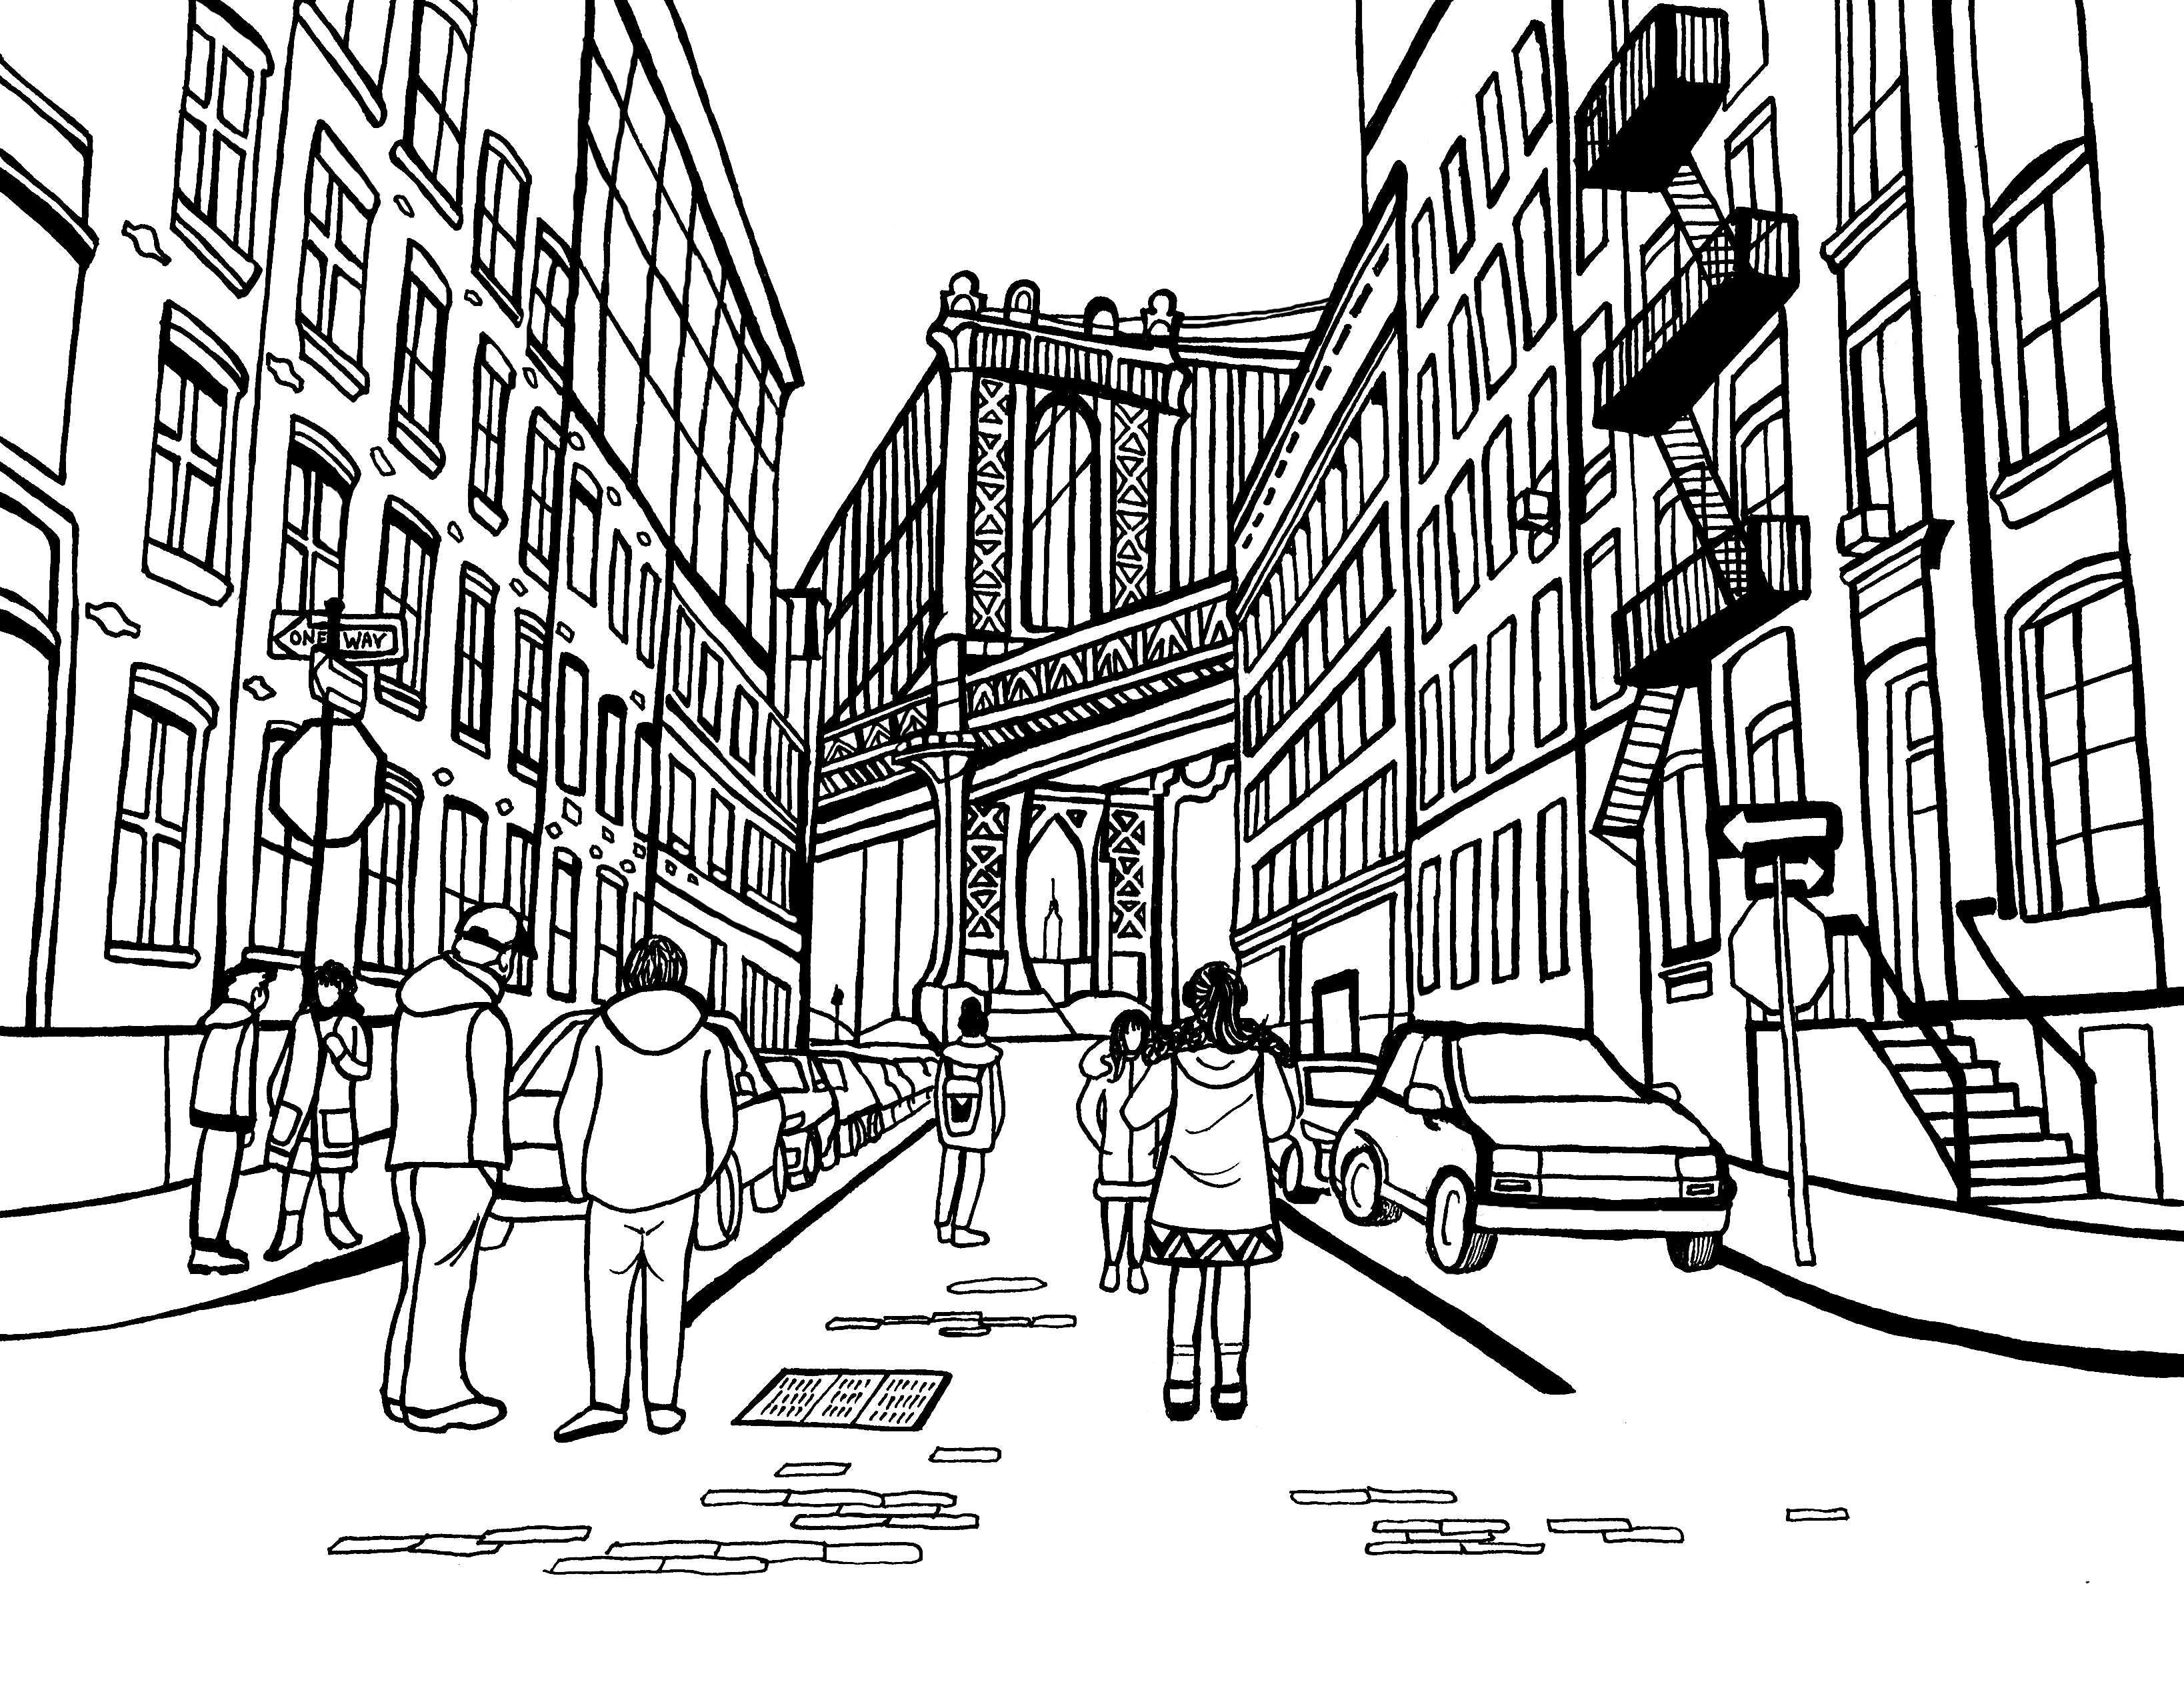 Line art illustration for coloring, featuring a street view in DUMBO, Brooklyn with pedestrians walking towards the Manhattan Bridge. The bridge's distinctive steel structure arches over the scene, set against a backdrop of classic New York buildings with their signature fire escapes. The urban landscape is detailed, with a street sign indicating 'One Way,' cars parked along the road, and a woman in the foreground capturing the moment with her camera. Free coloring page :: You-Color